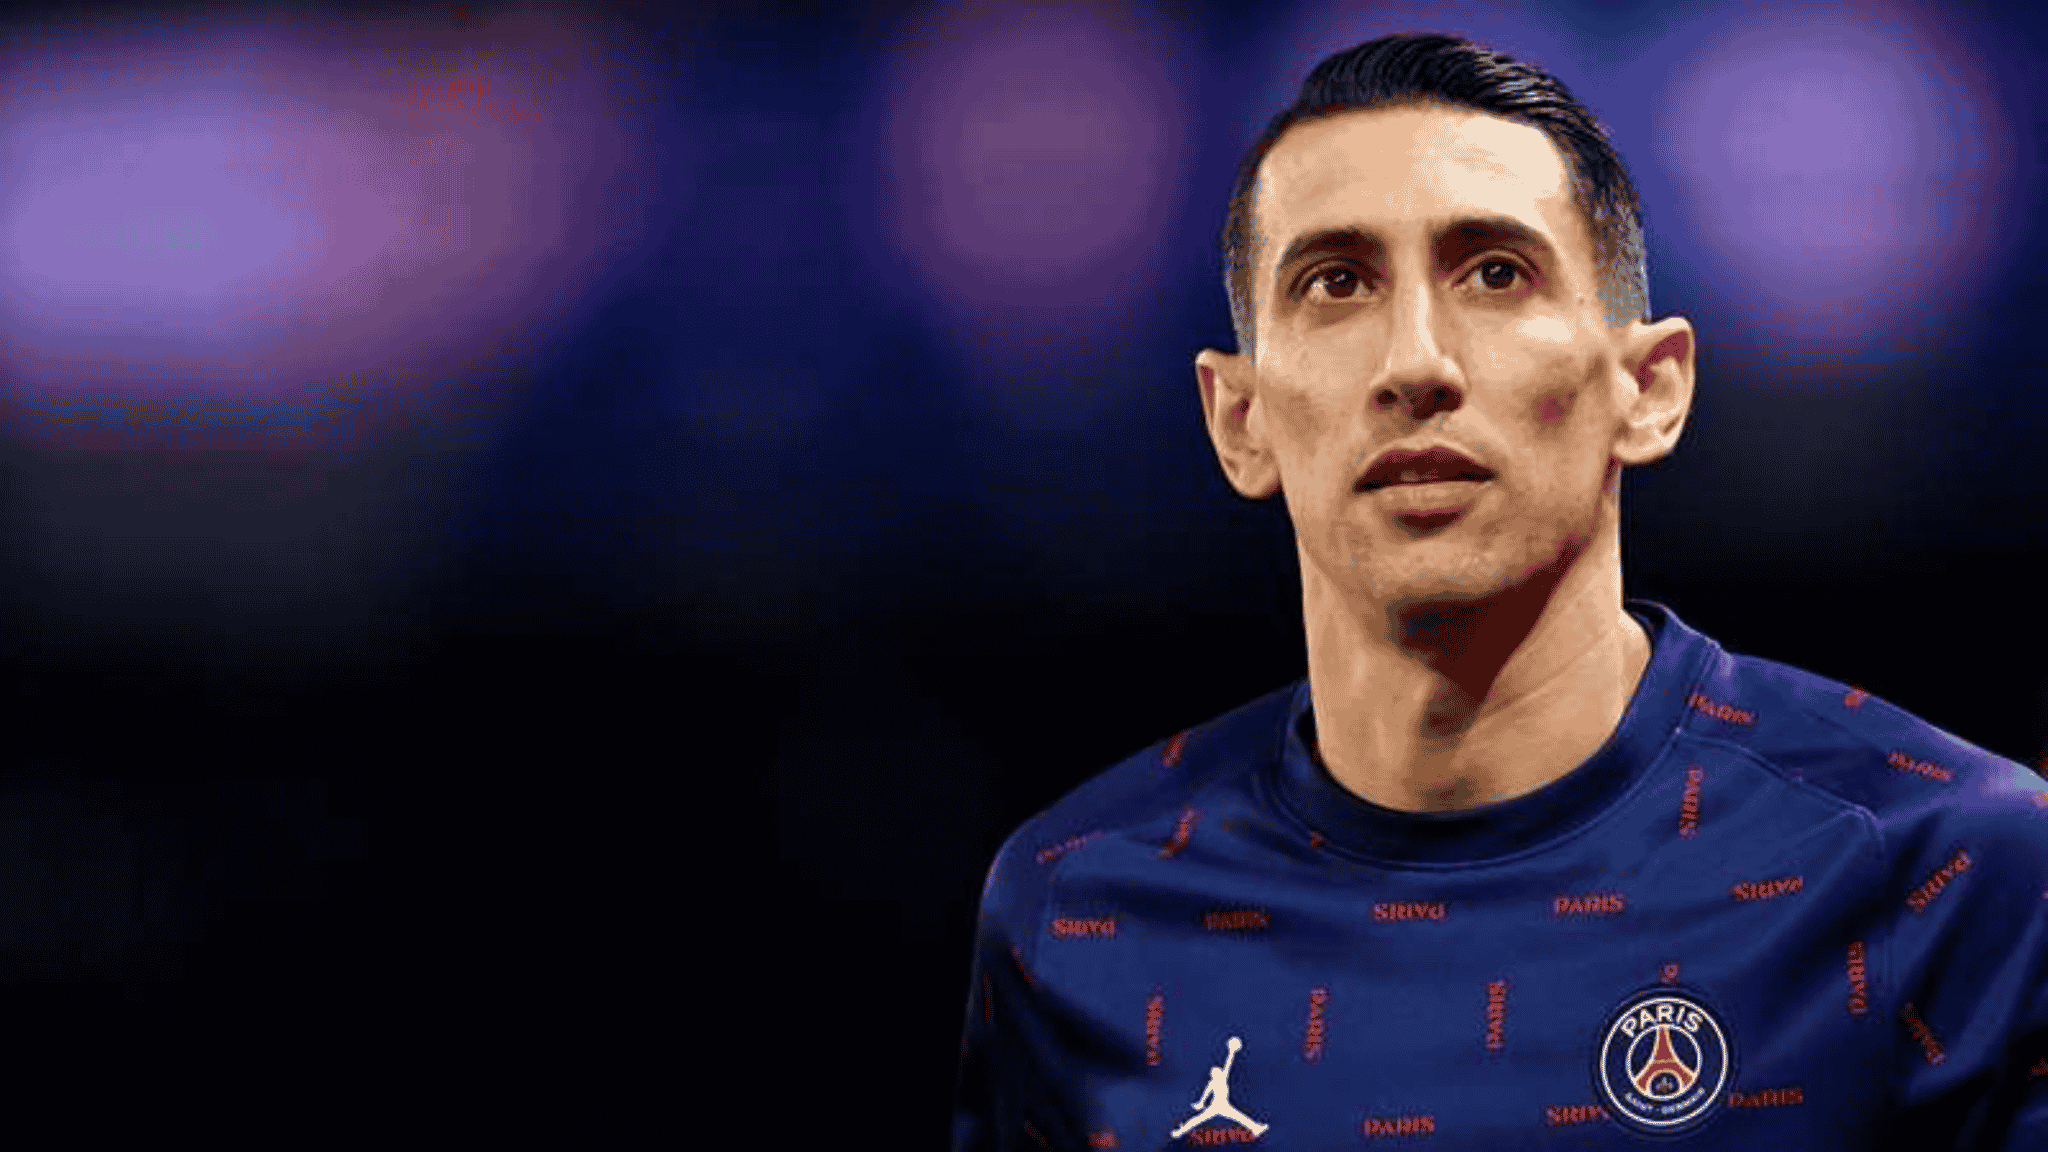 Revealed: What Di Maria will earn if he joins Barcelona, My Football Facts